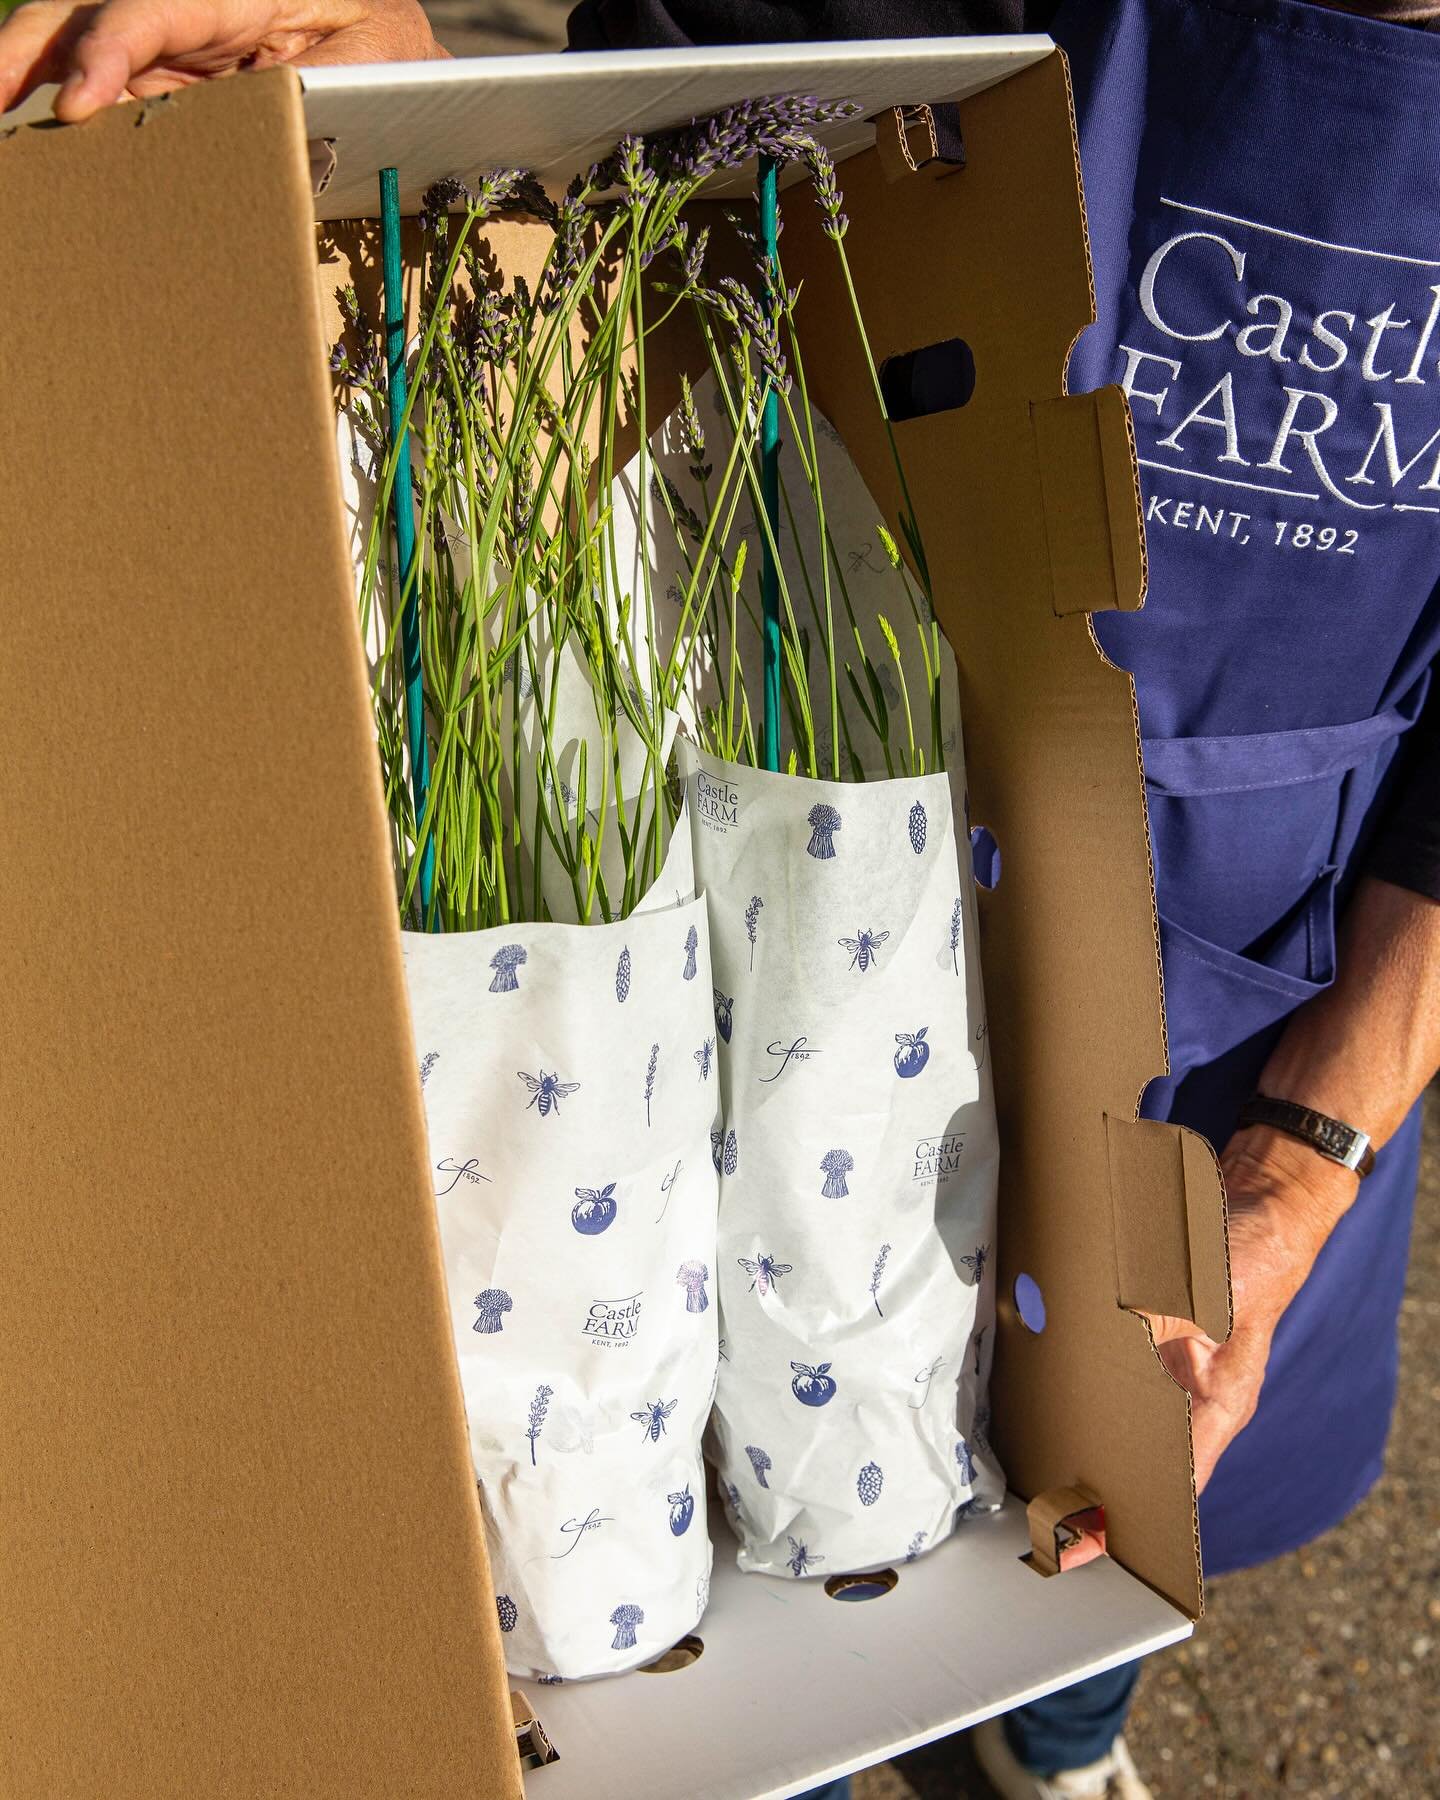 PLANTS DIRECT 💜 || Wrapped in paper and packaged in cardboard... our Lavender plants are English grown and despatched direct from the farm in bespoke designed boxes to protect them in transit. Quality controlled before we pack each and every one. 

